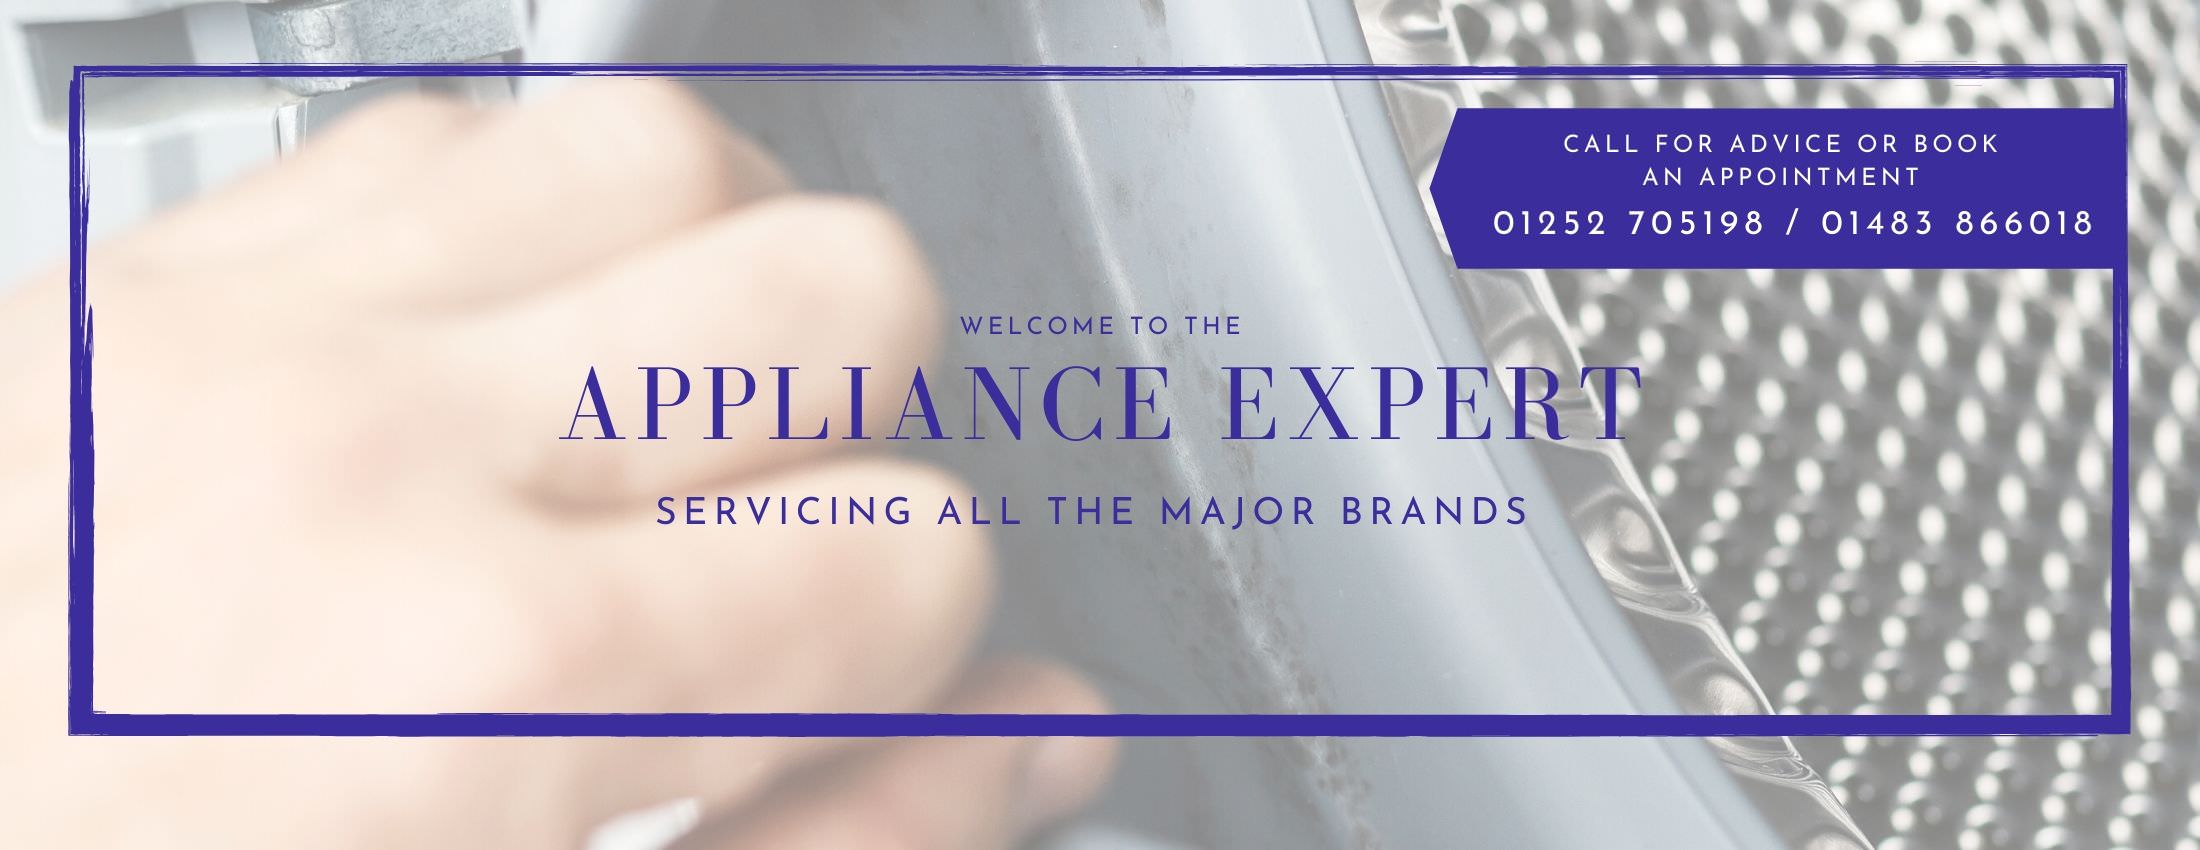 Appliance Expert Domestic Appliance Repair Services